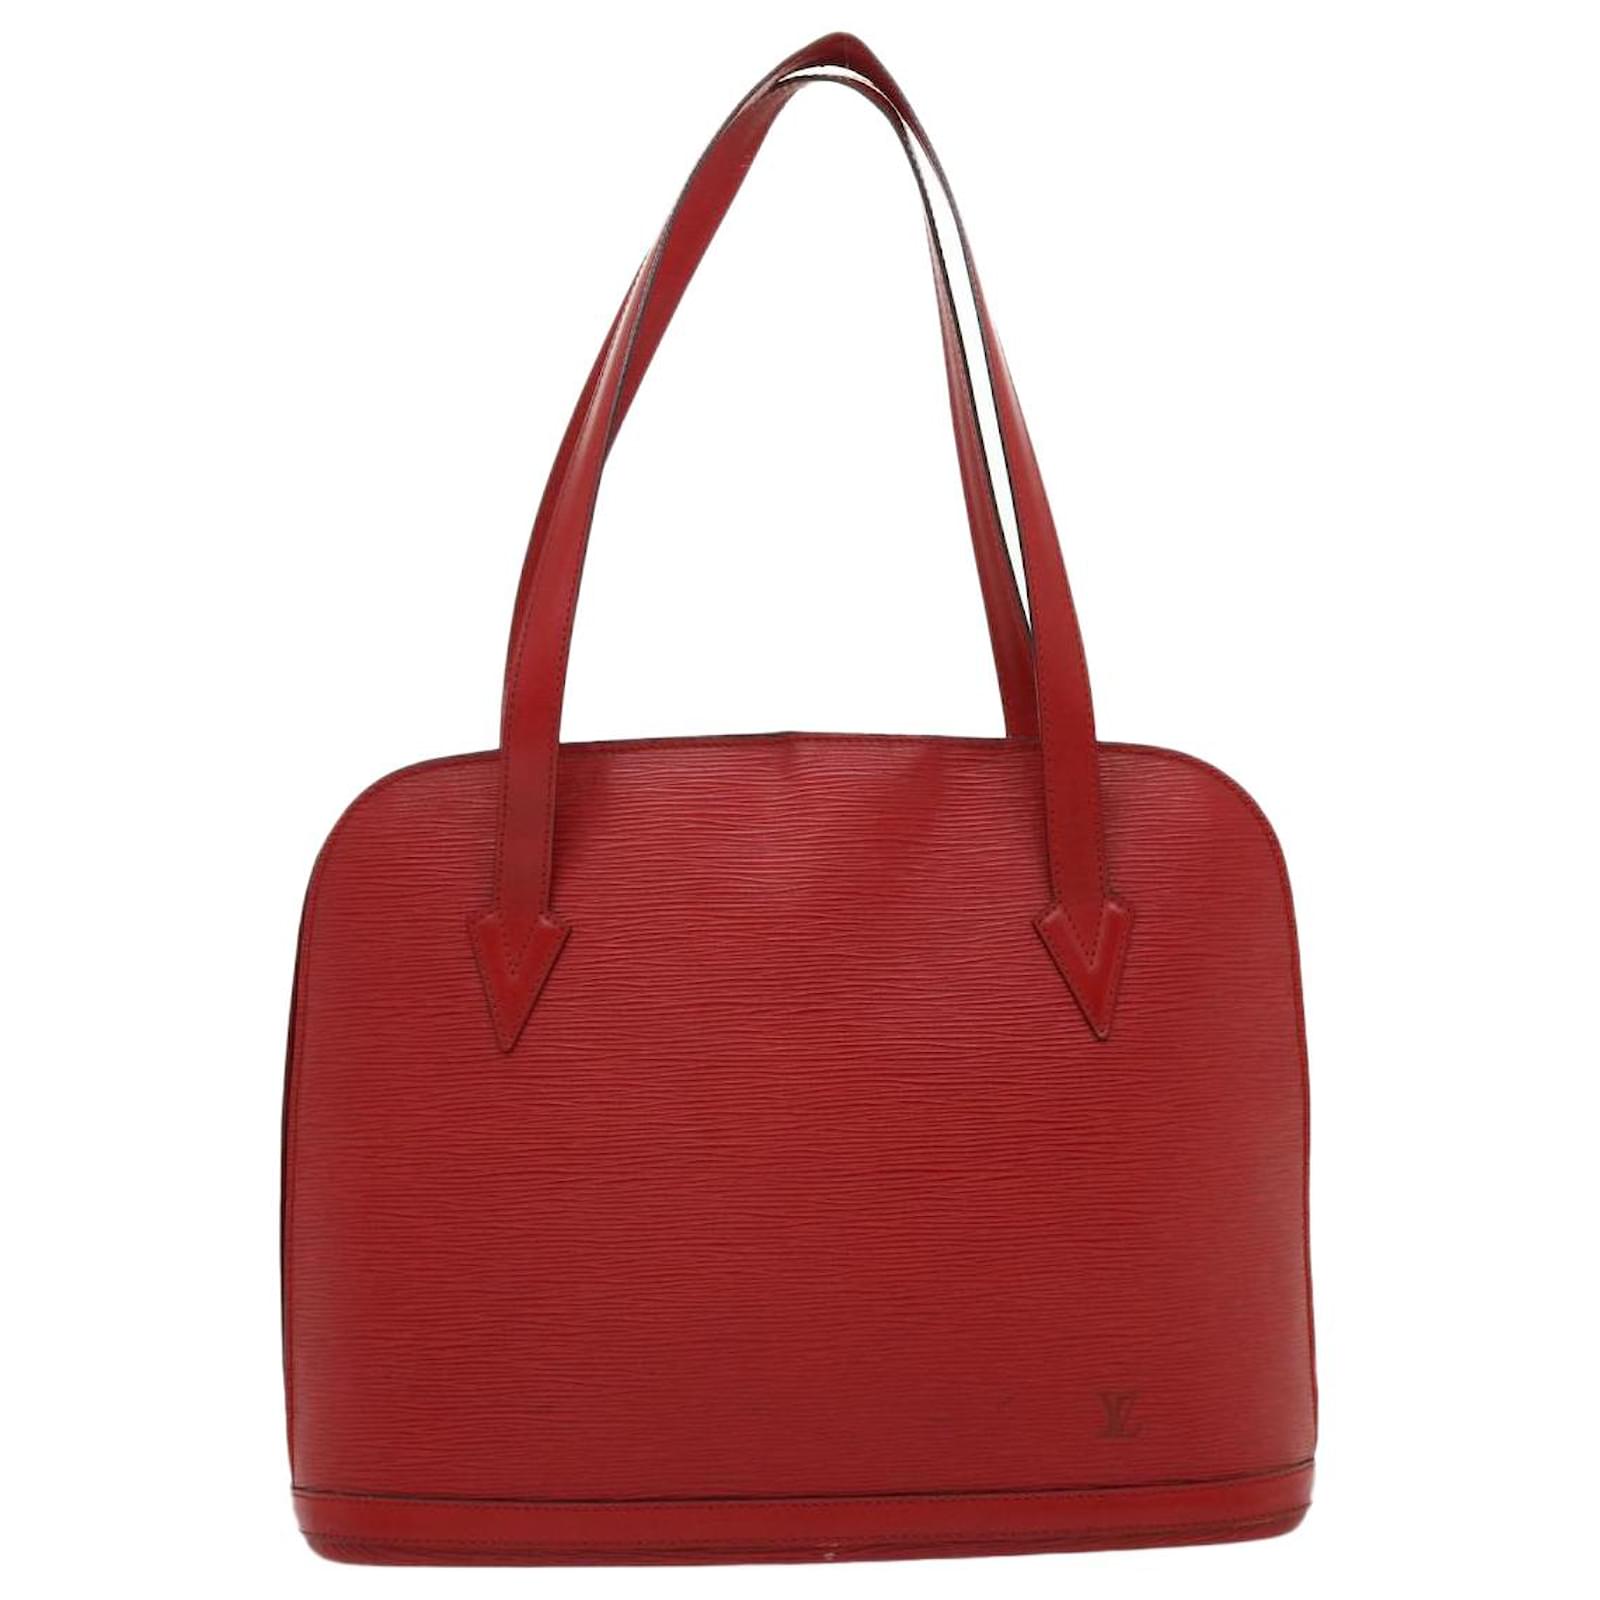 Louis Vuitton Tote Bag Epi Lussac Leather Red M52287